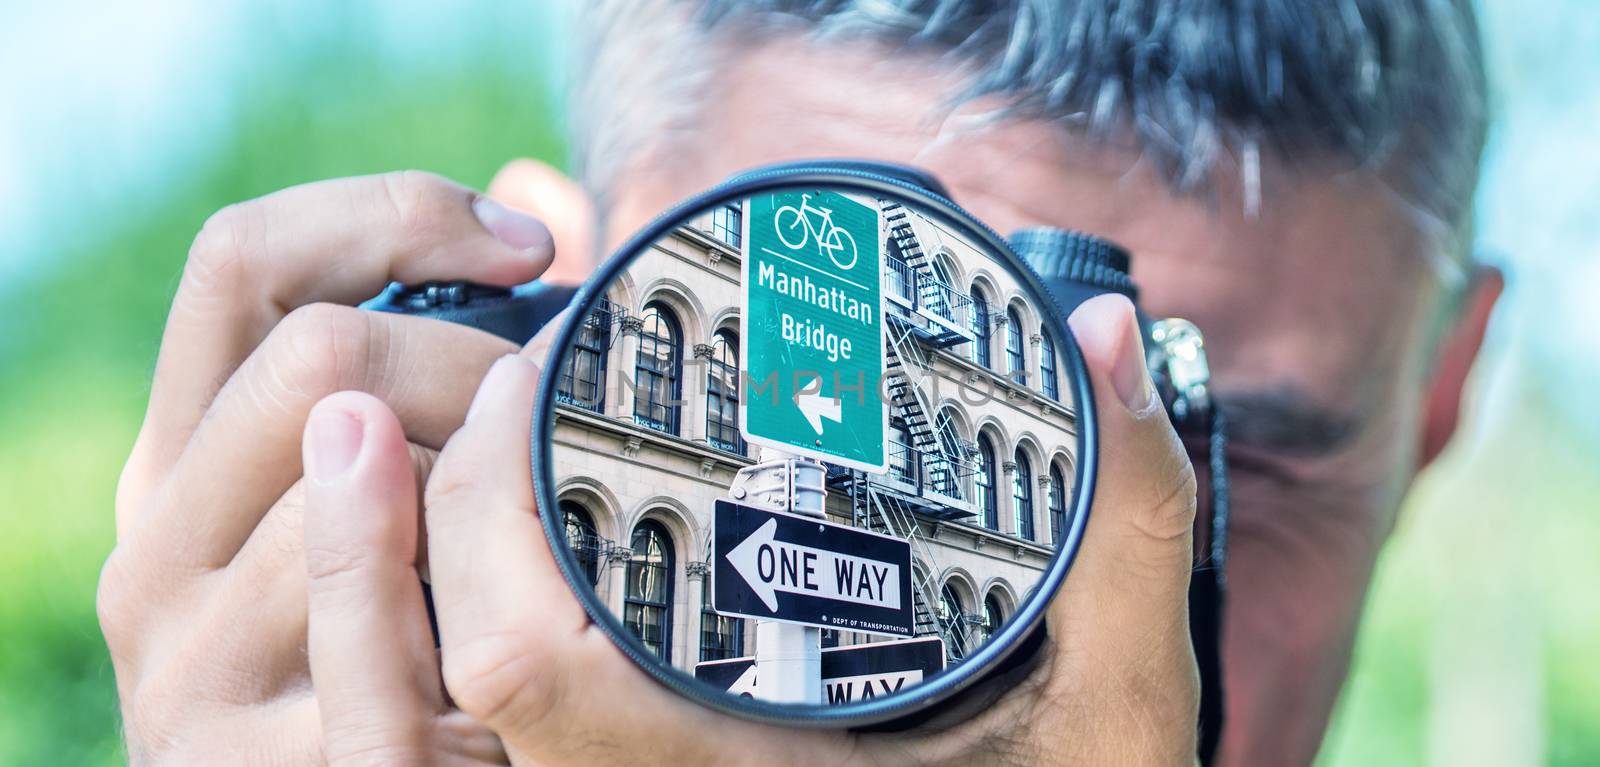 Photographer taking photo with DSLR camera at New York Street Signs. Shallow DOF